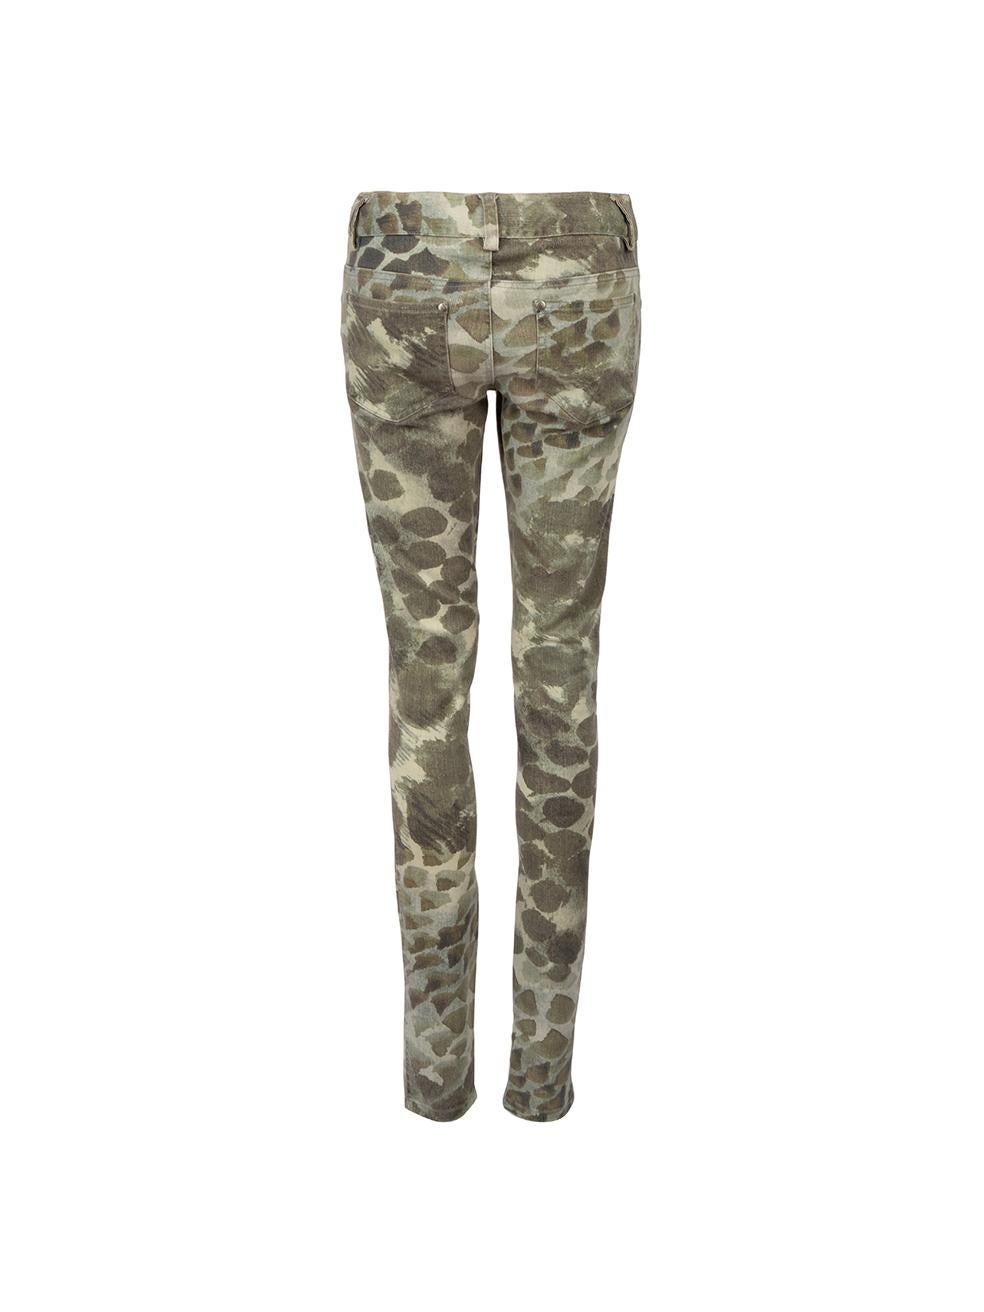 Alice + Olivia Khaki Denim Abstract Printed Skinny Jeans Size XS In Good Condition For Sale In London, GB